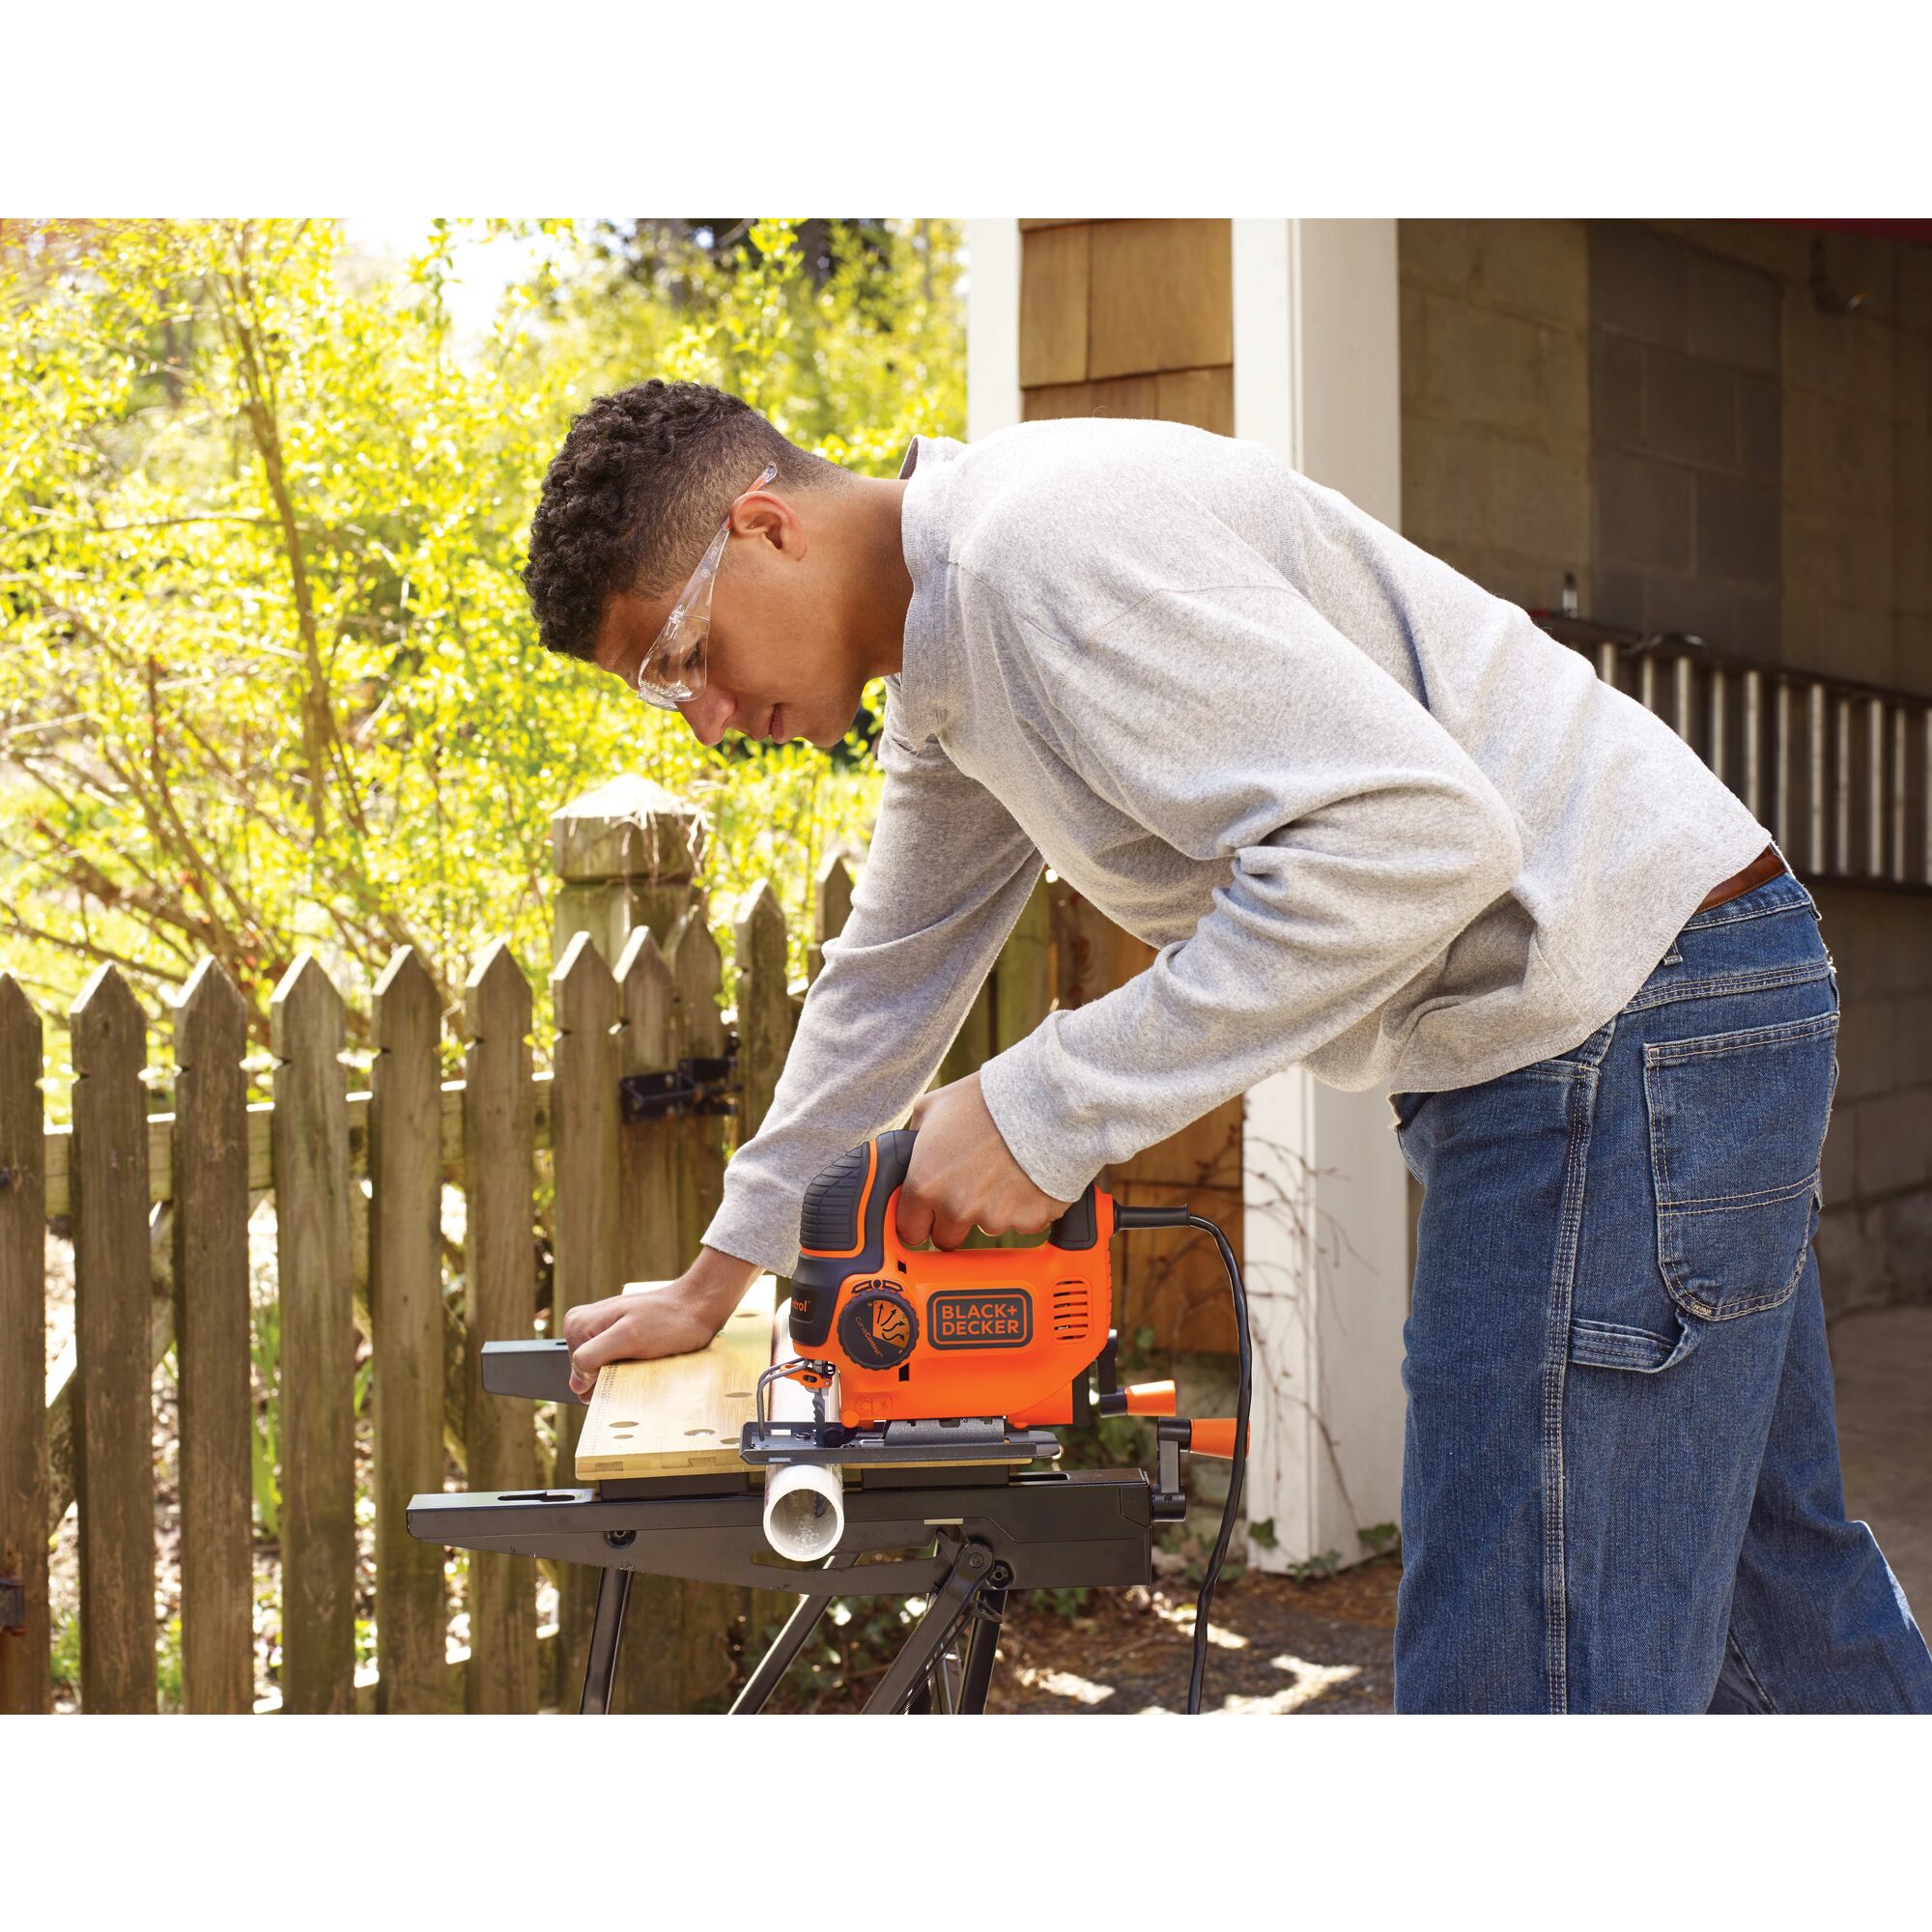 Black and decker jig saw smart select being used by a person.